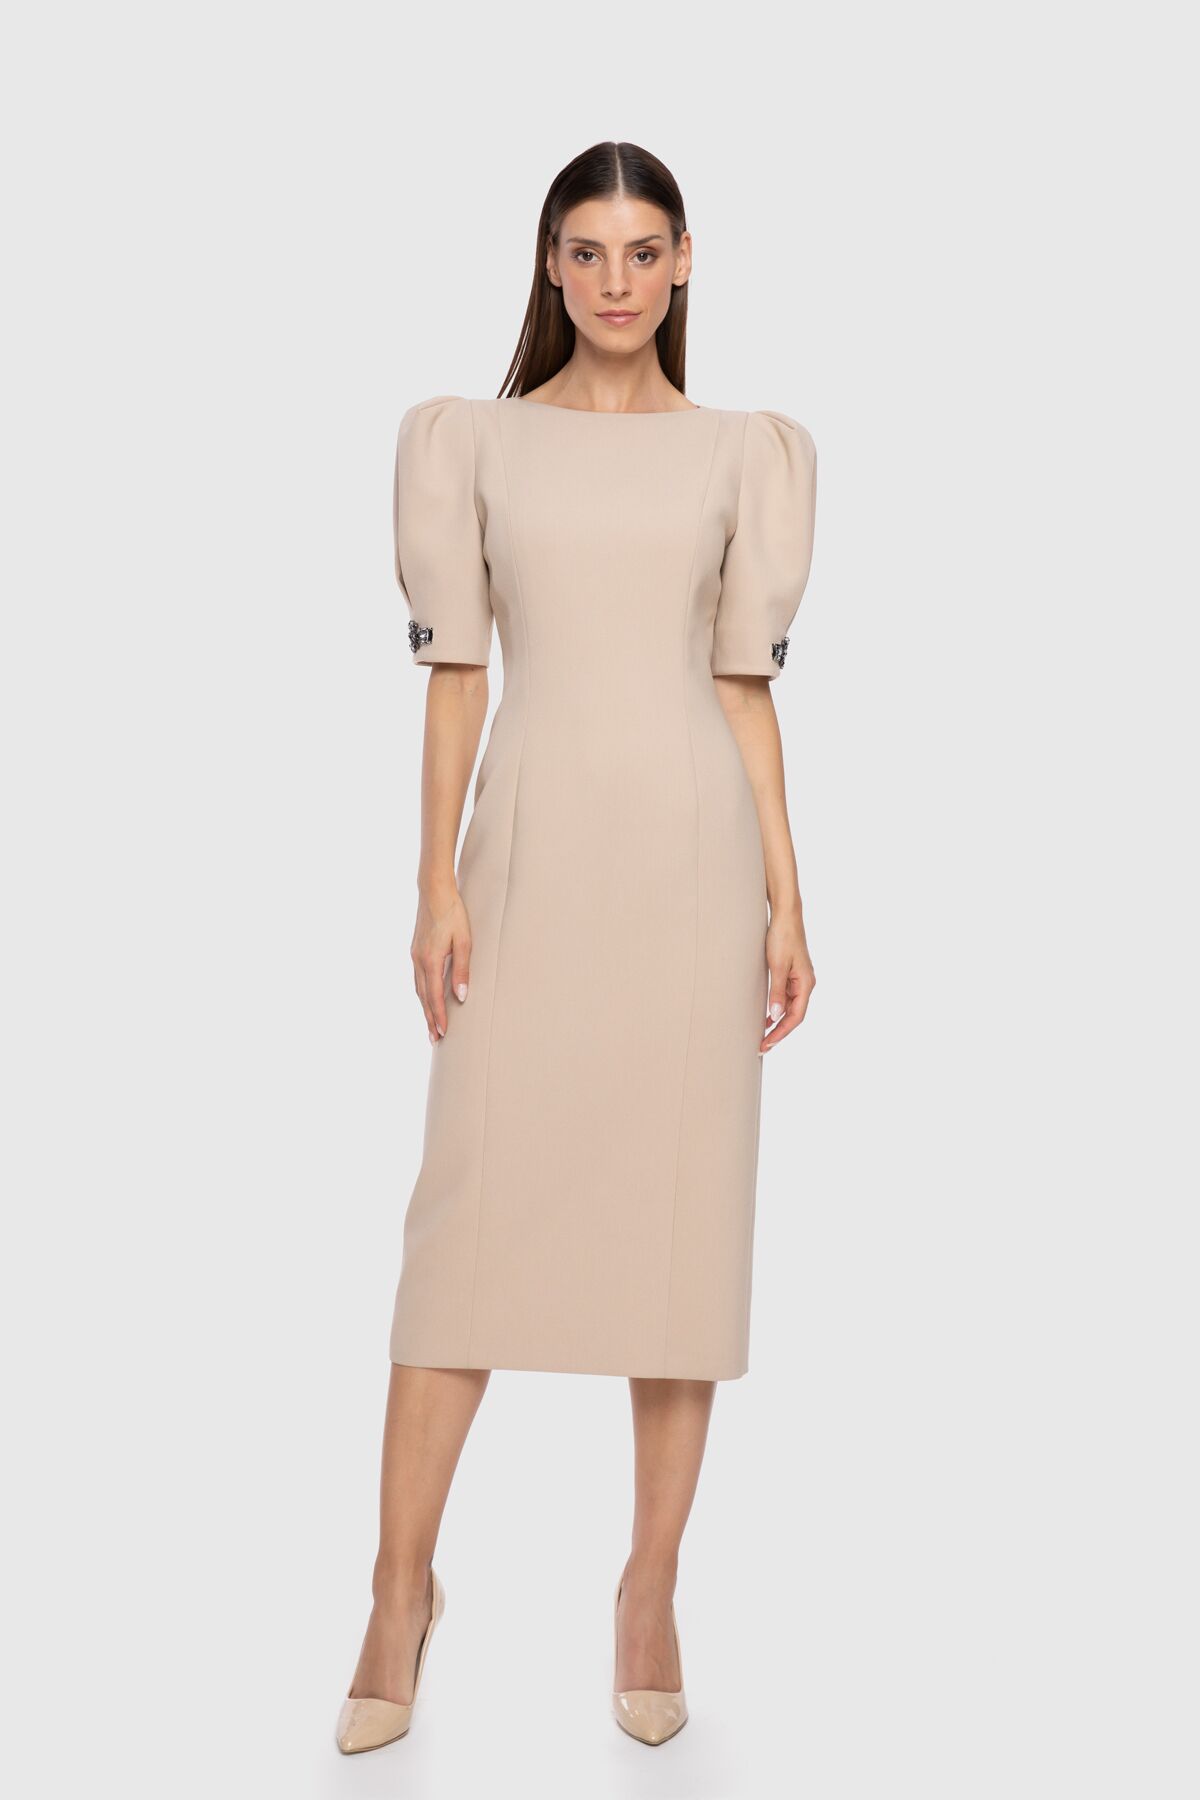  GIZIA - With Embroidered Sleeves Midi Length Classic Beige Cocktail Dress